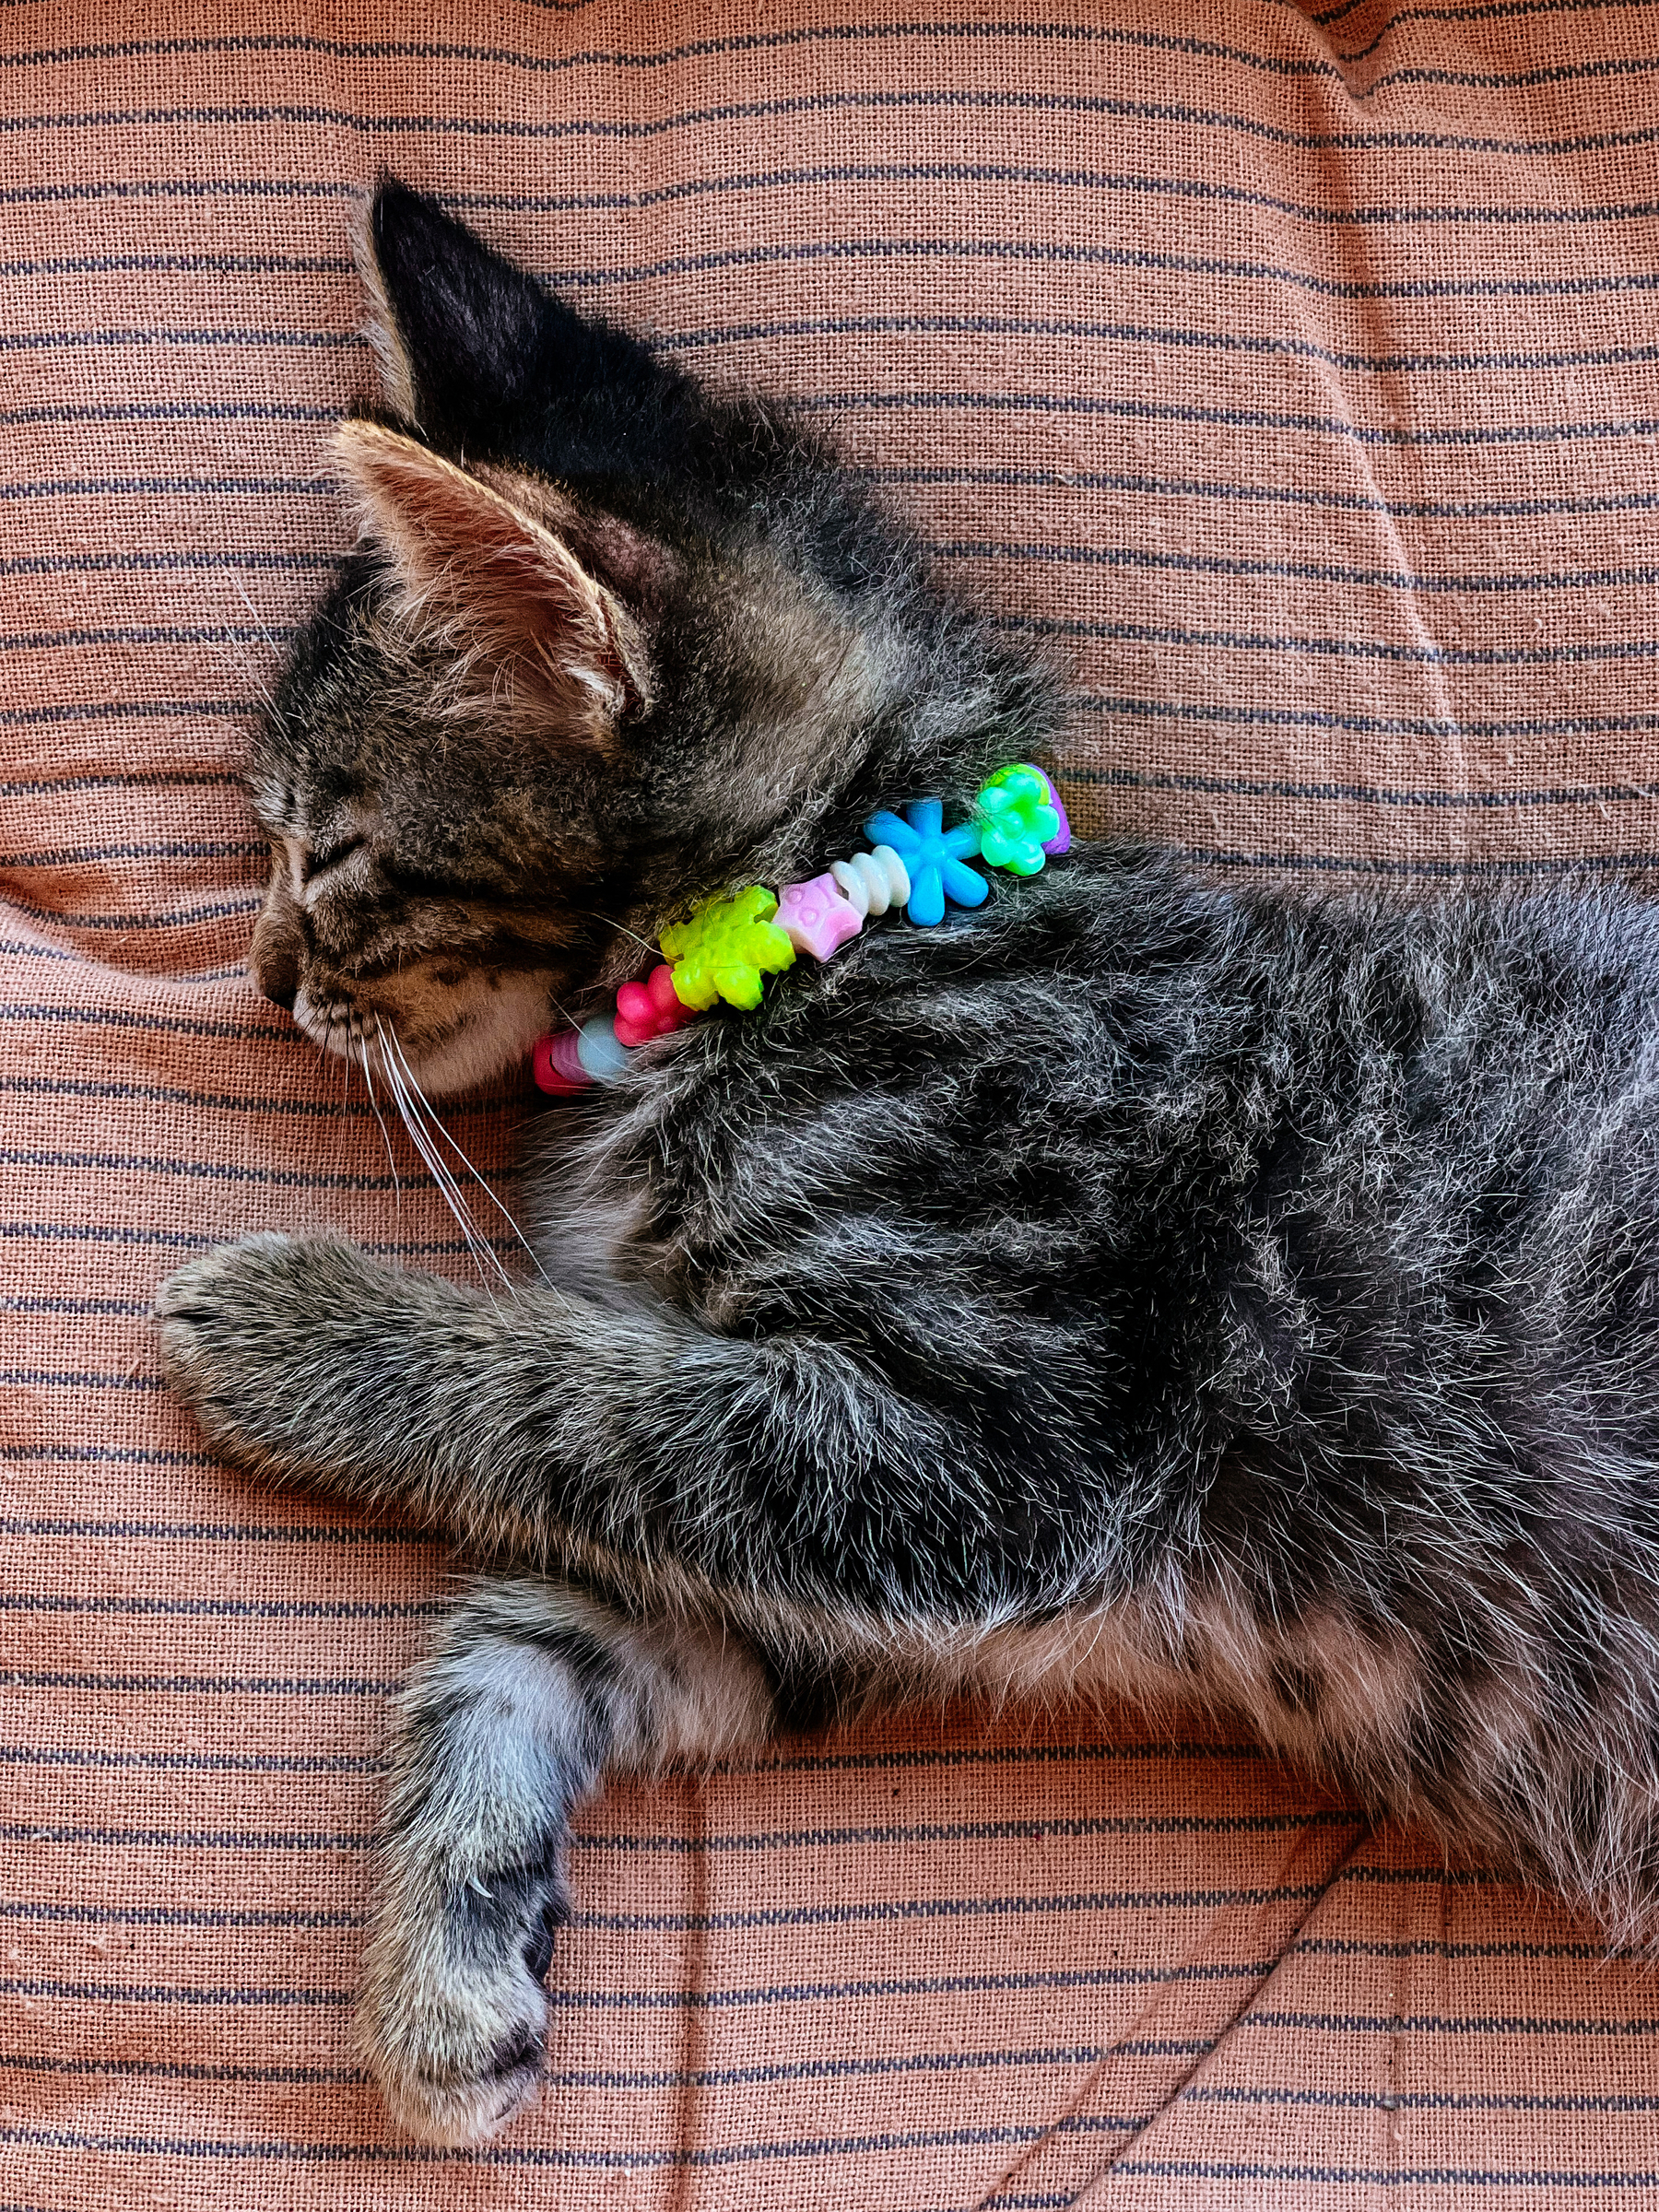 a sleeping kitten, with a necklace